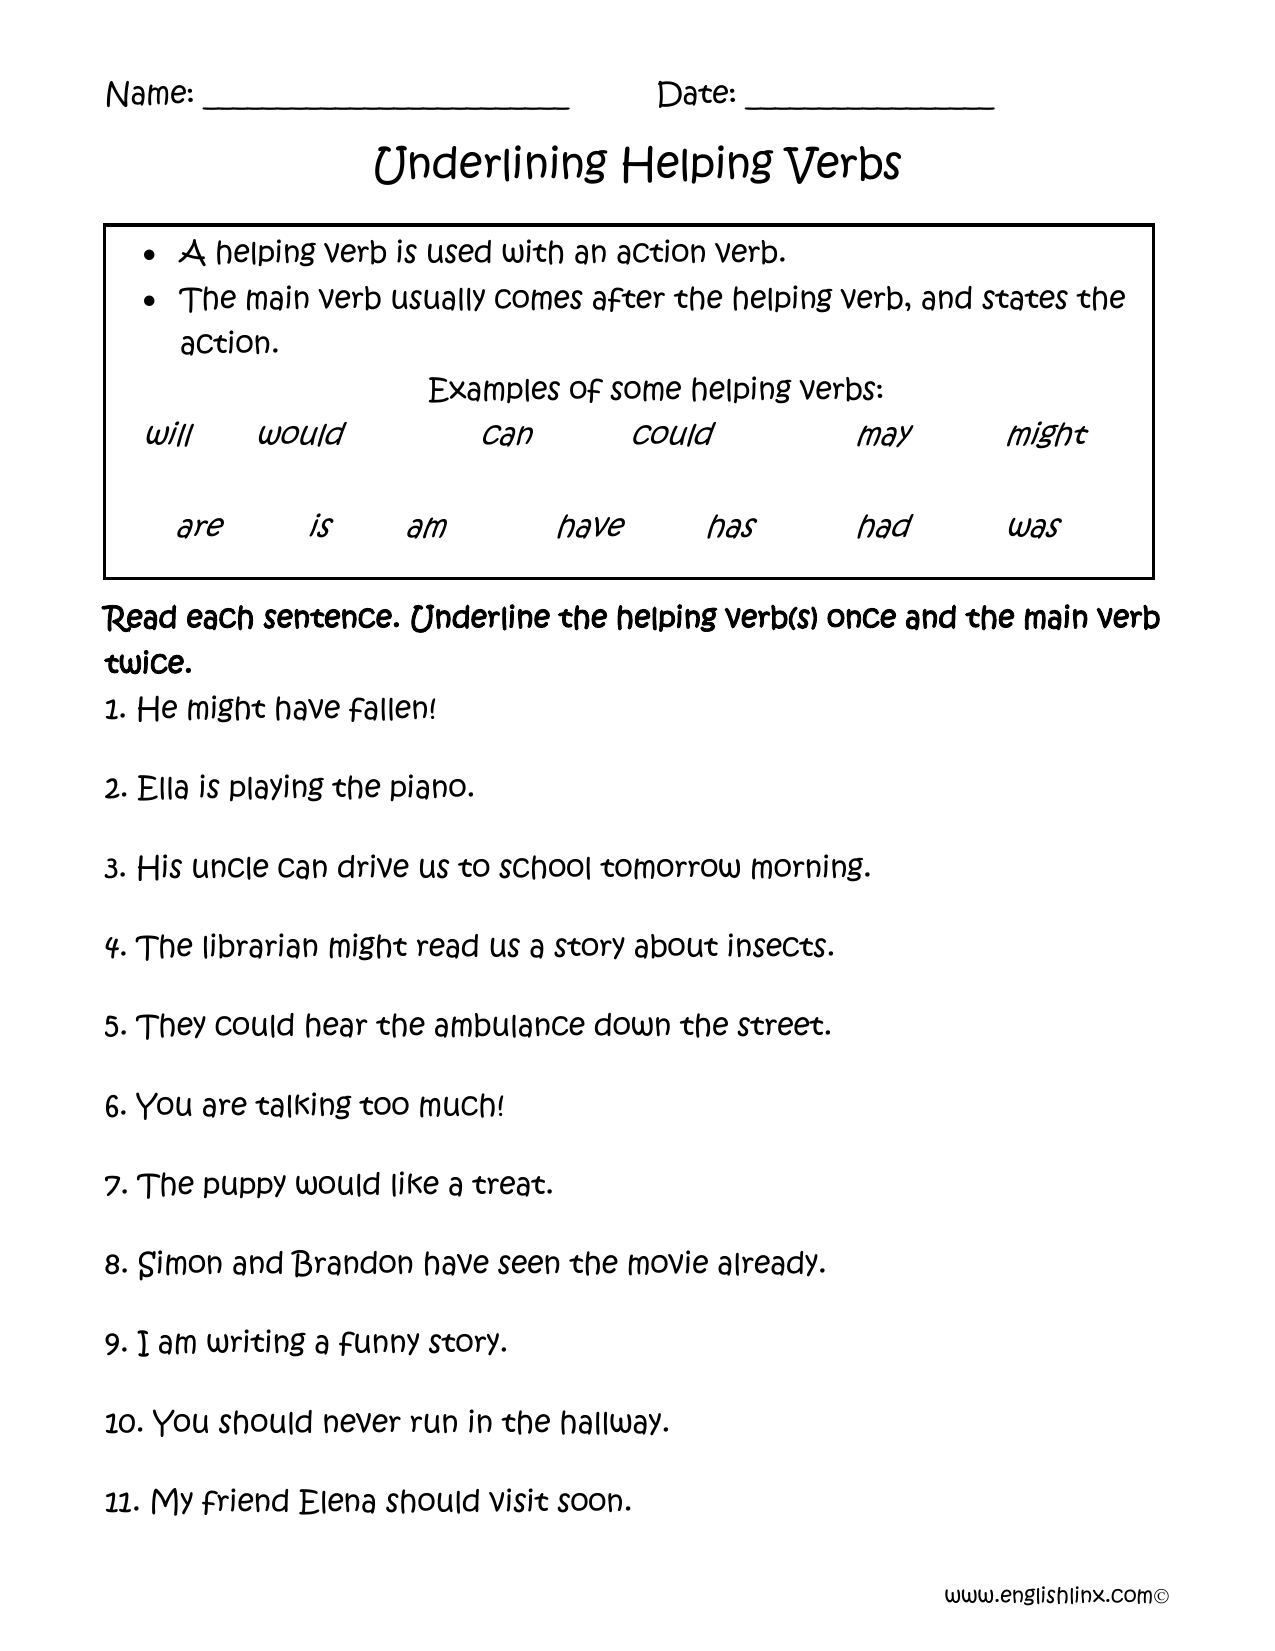 Helping Verbs Or Linking Verbs Worksheet And Sorting Center Game Action Linking Verbs